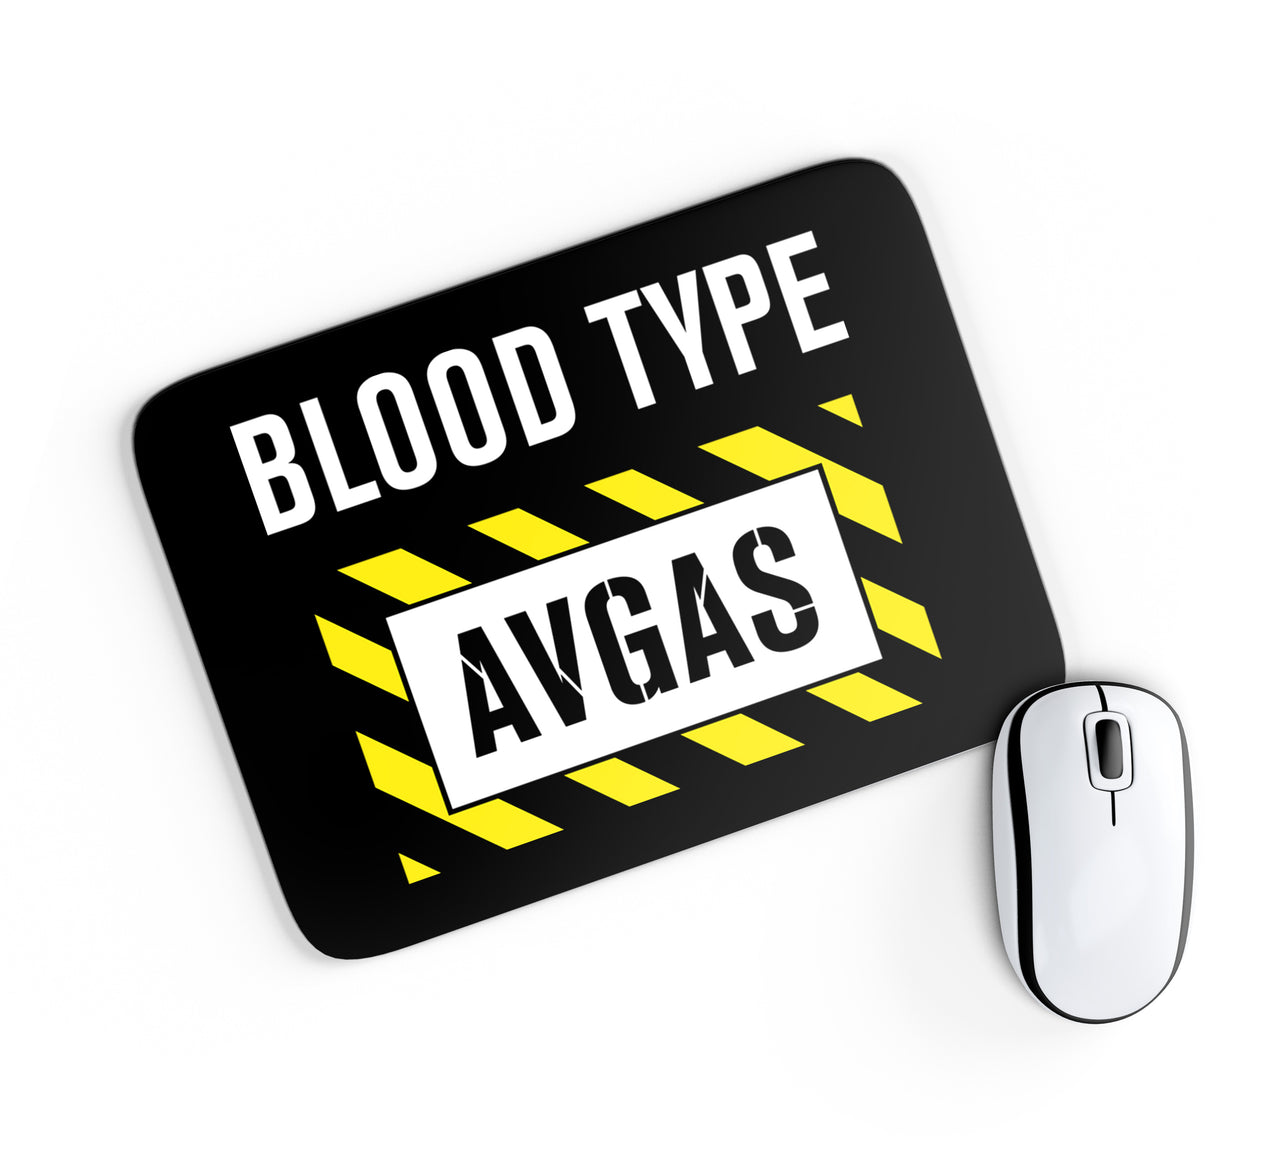 Blood Type AVGAS Designed Mouse Pads